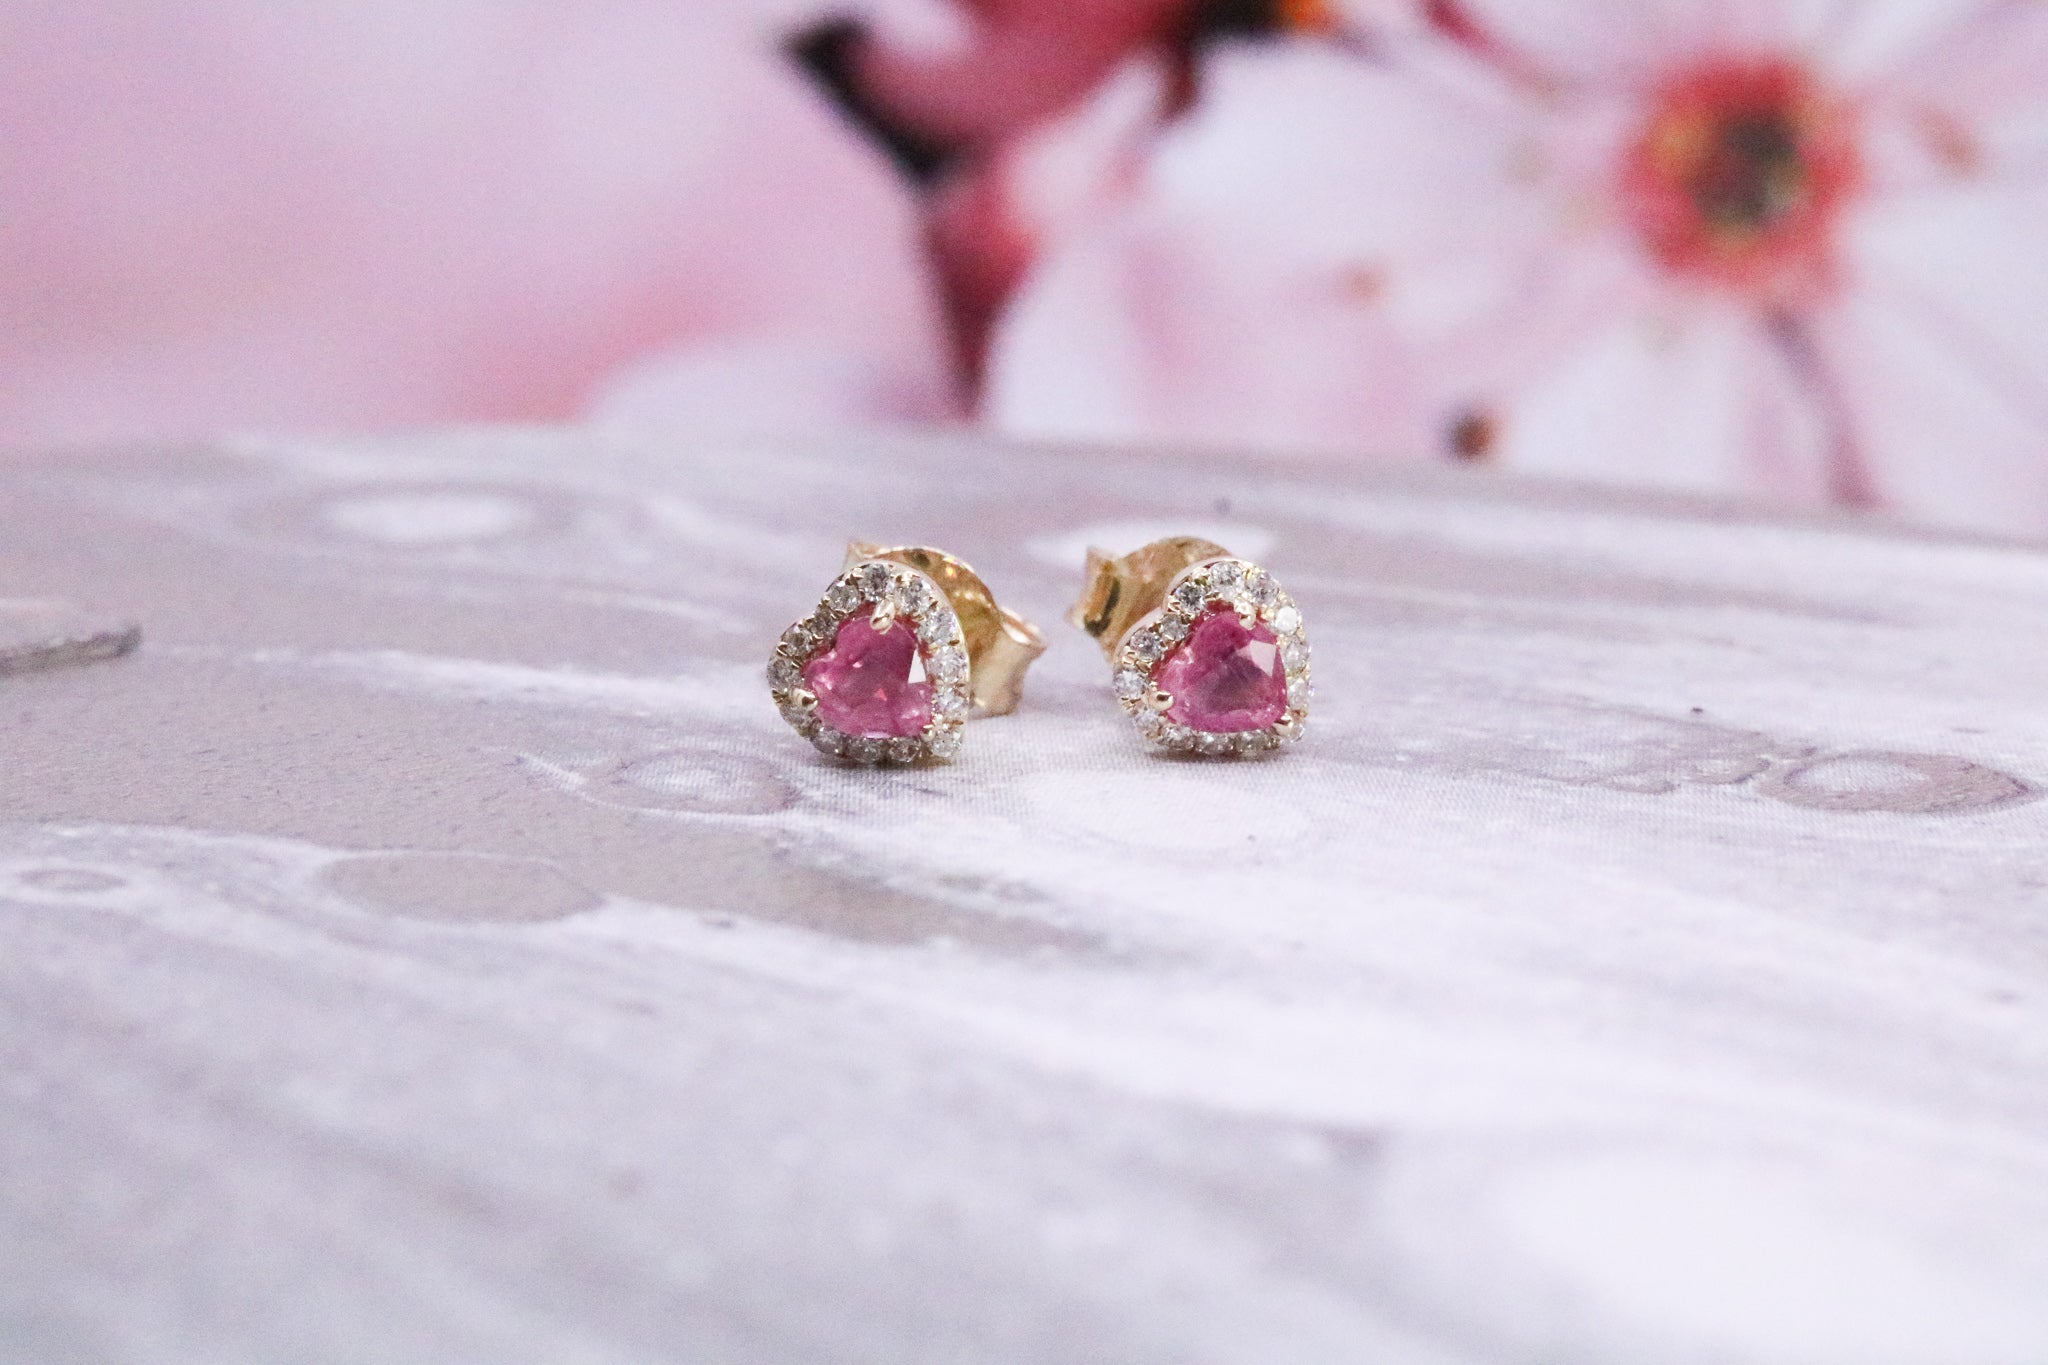 9ct Gold Earrings Pink Sapphire- DR4004 - Hallmark Jewellers Formby & The Jewellers Bench Widnes